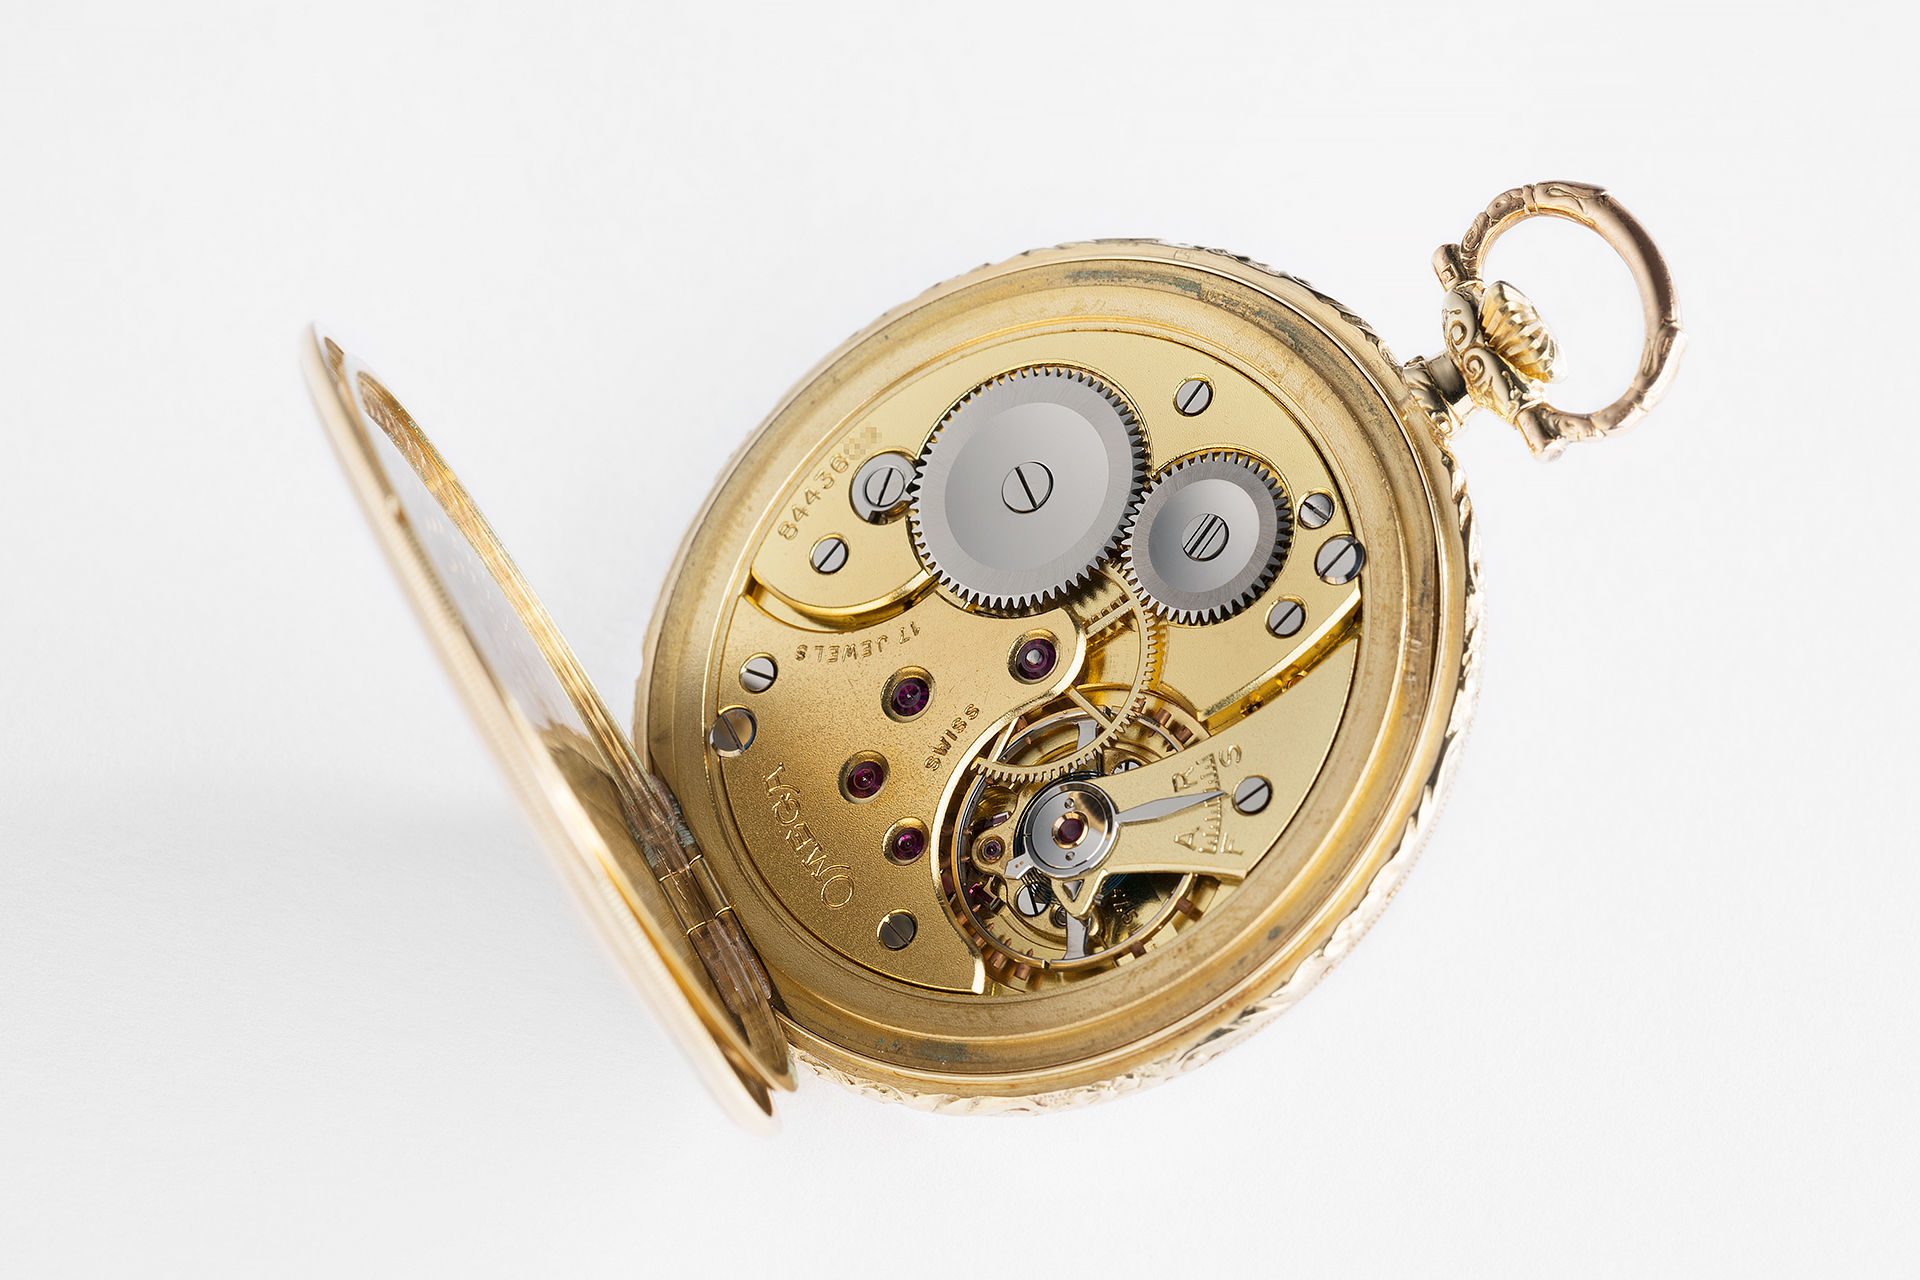 ref OK1042 | 14ct 'Frosted Dial' | Omega Pocket Watch